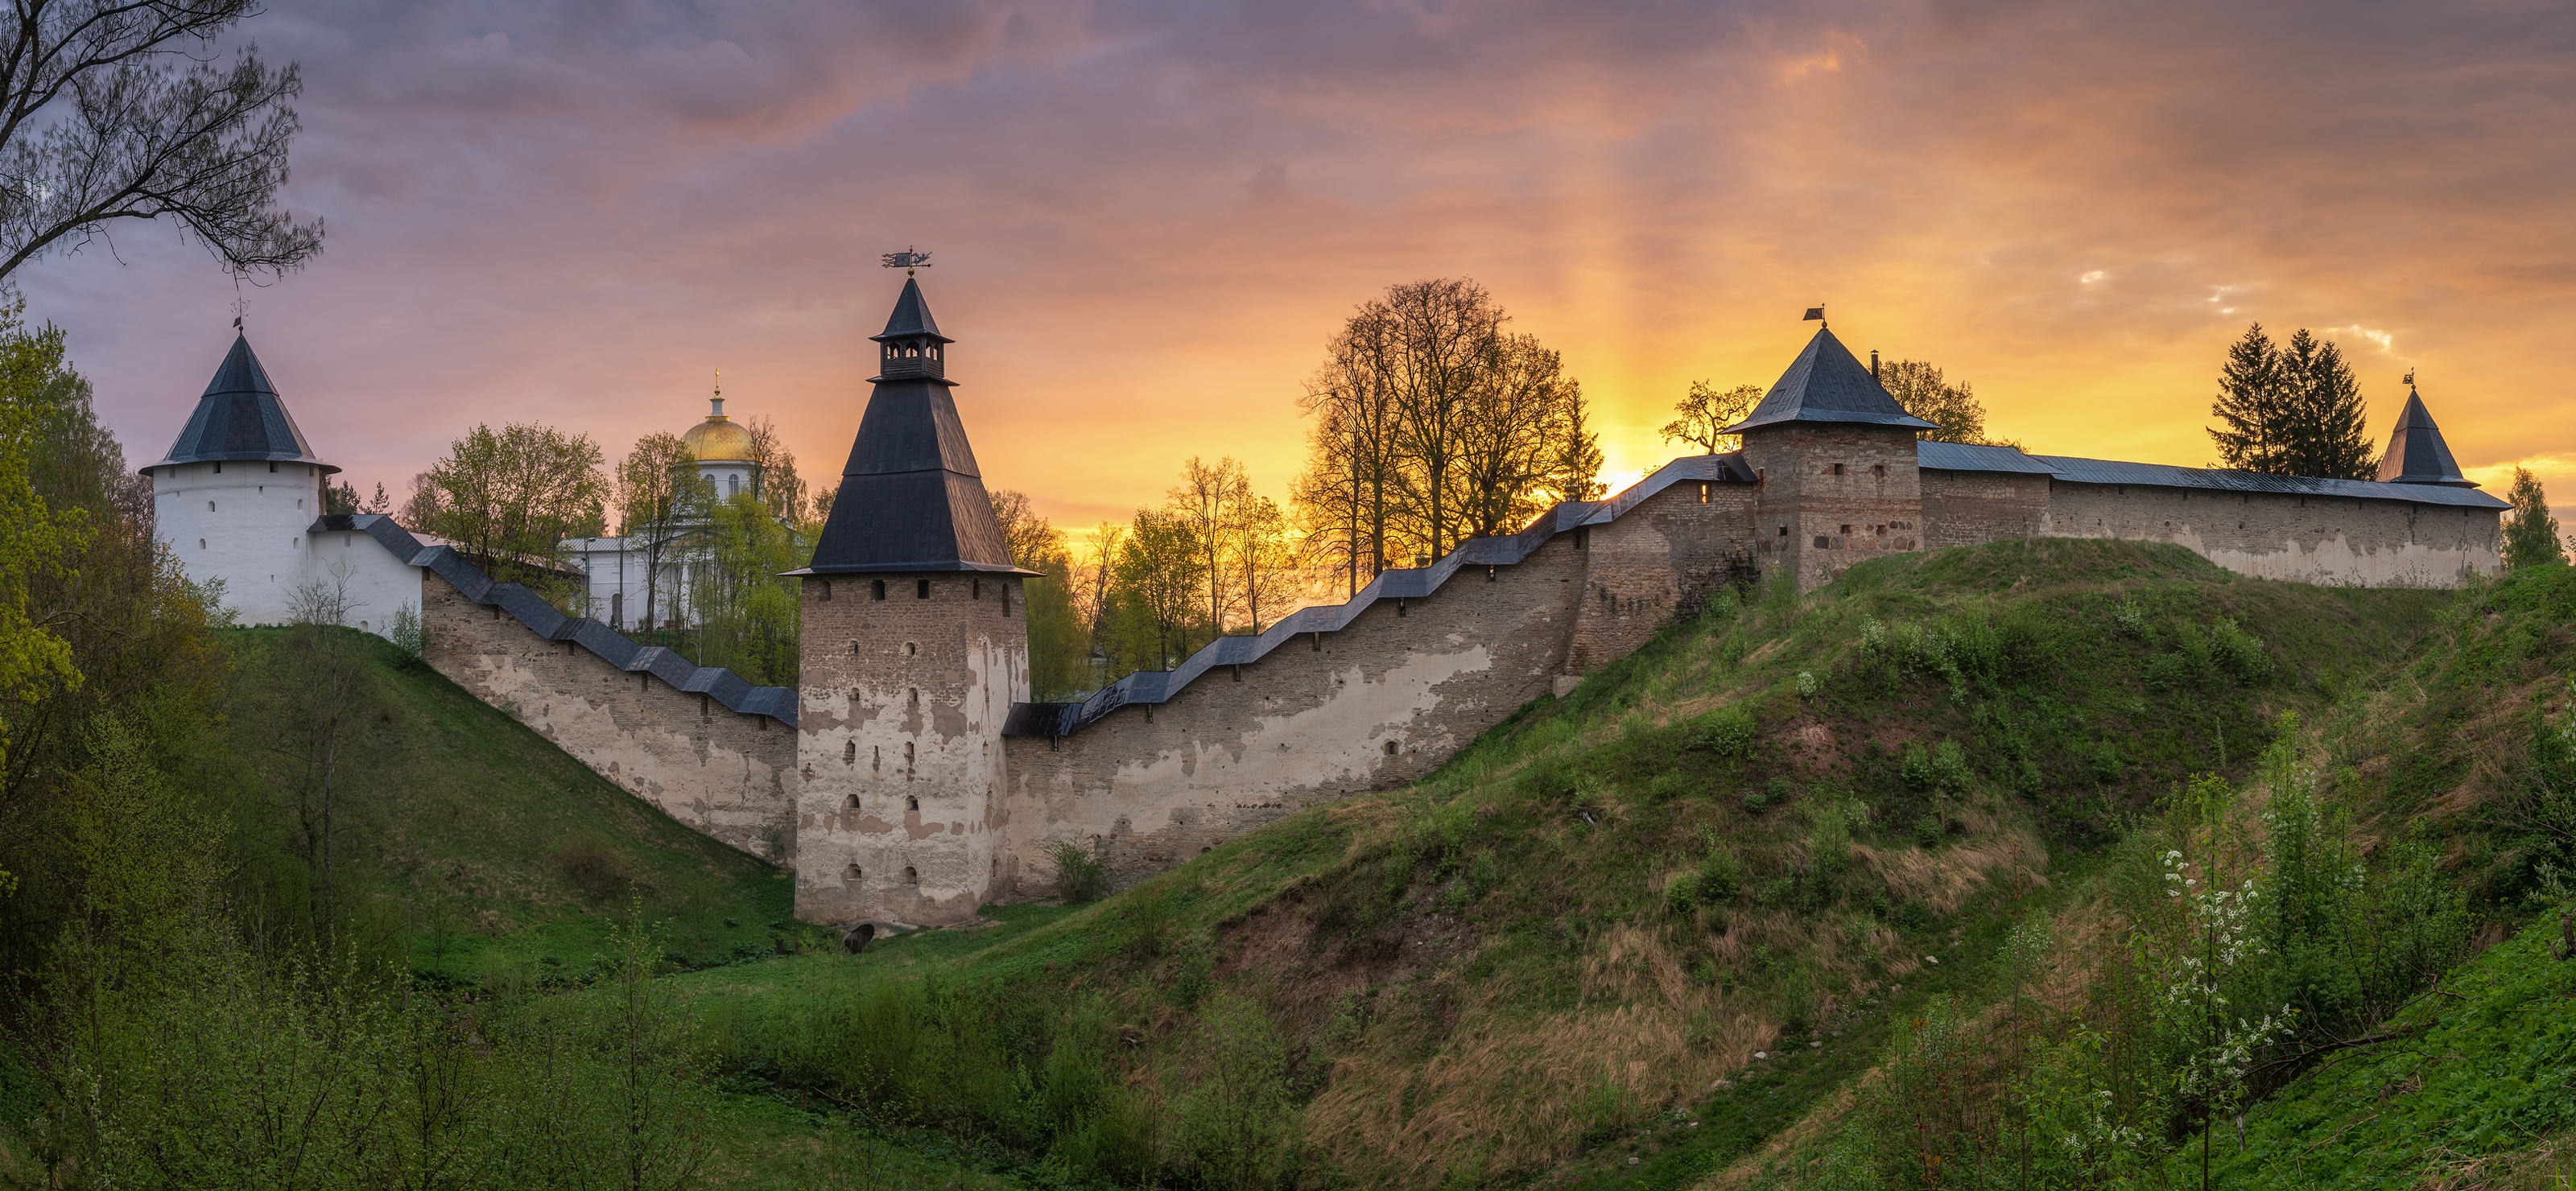 General 3200x1480 architecture building old building castle fortress Russia sunrise tower